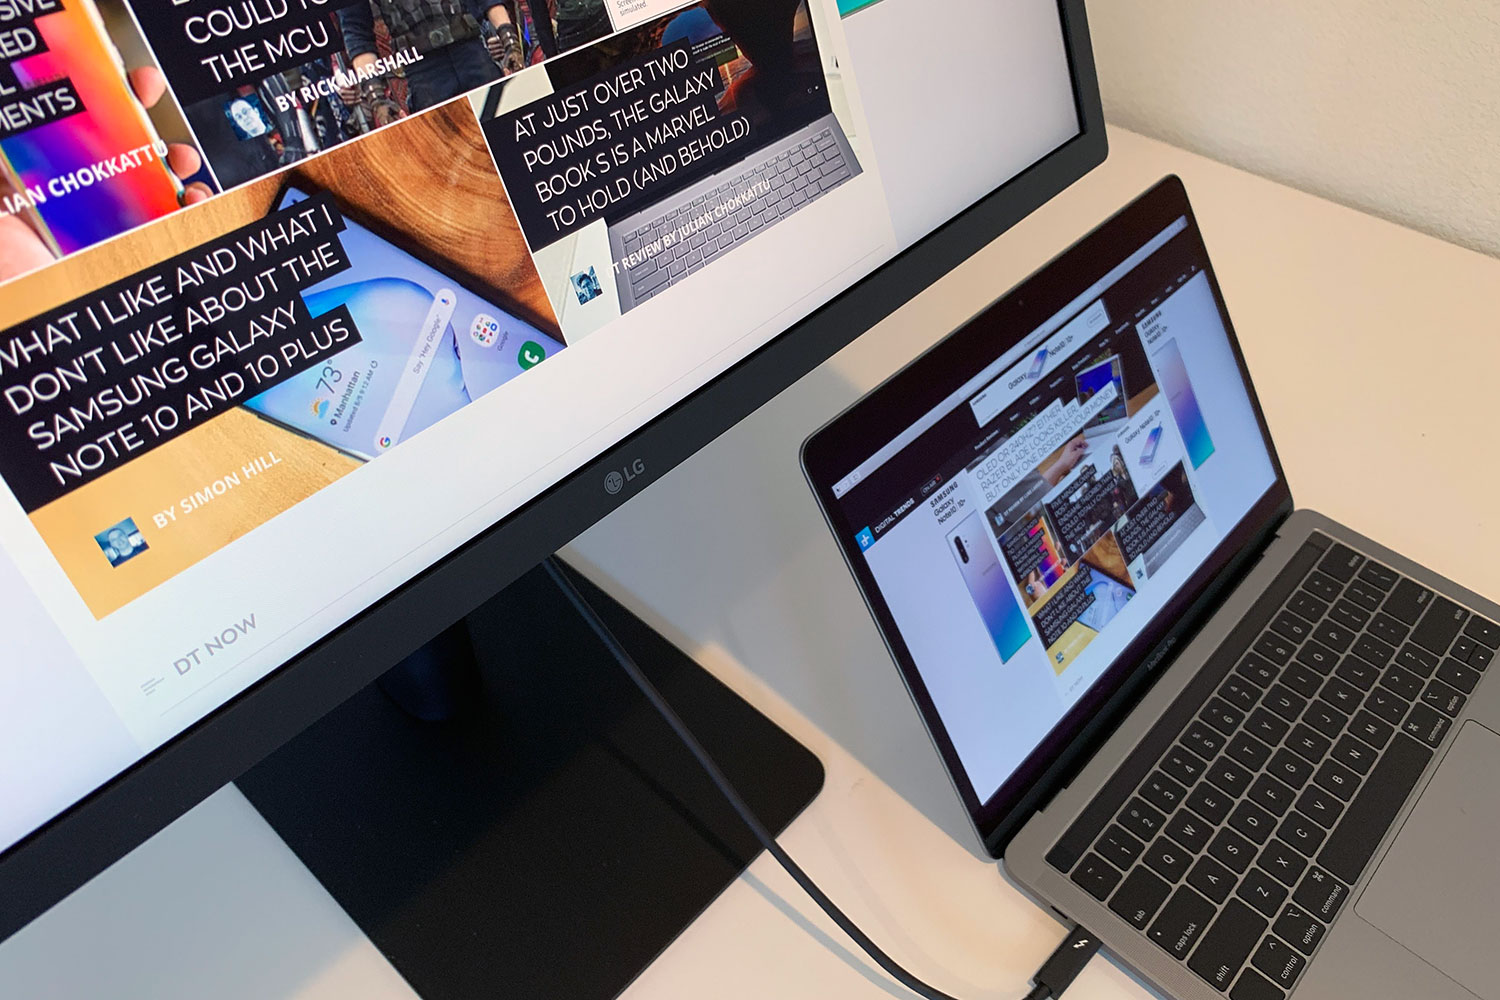 Review: LG UltraFine 4K Display (2019) - two Thunderbolt 3 ports